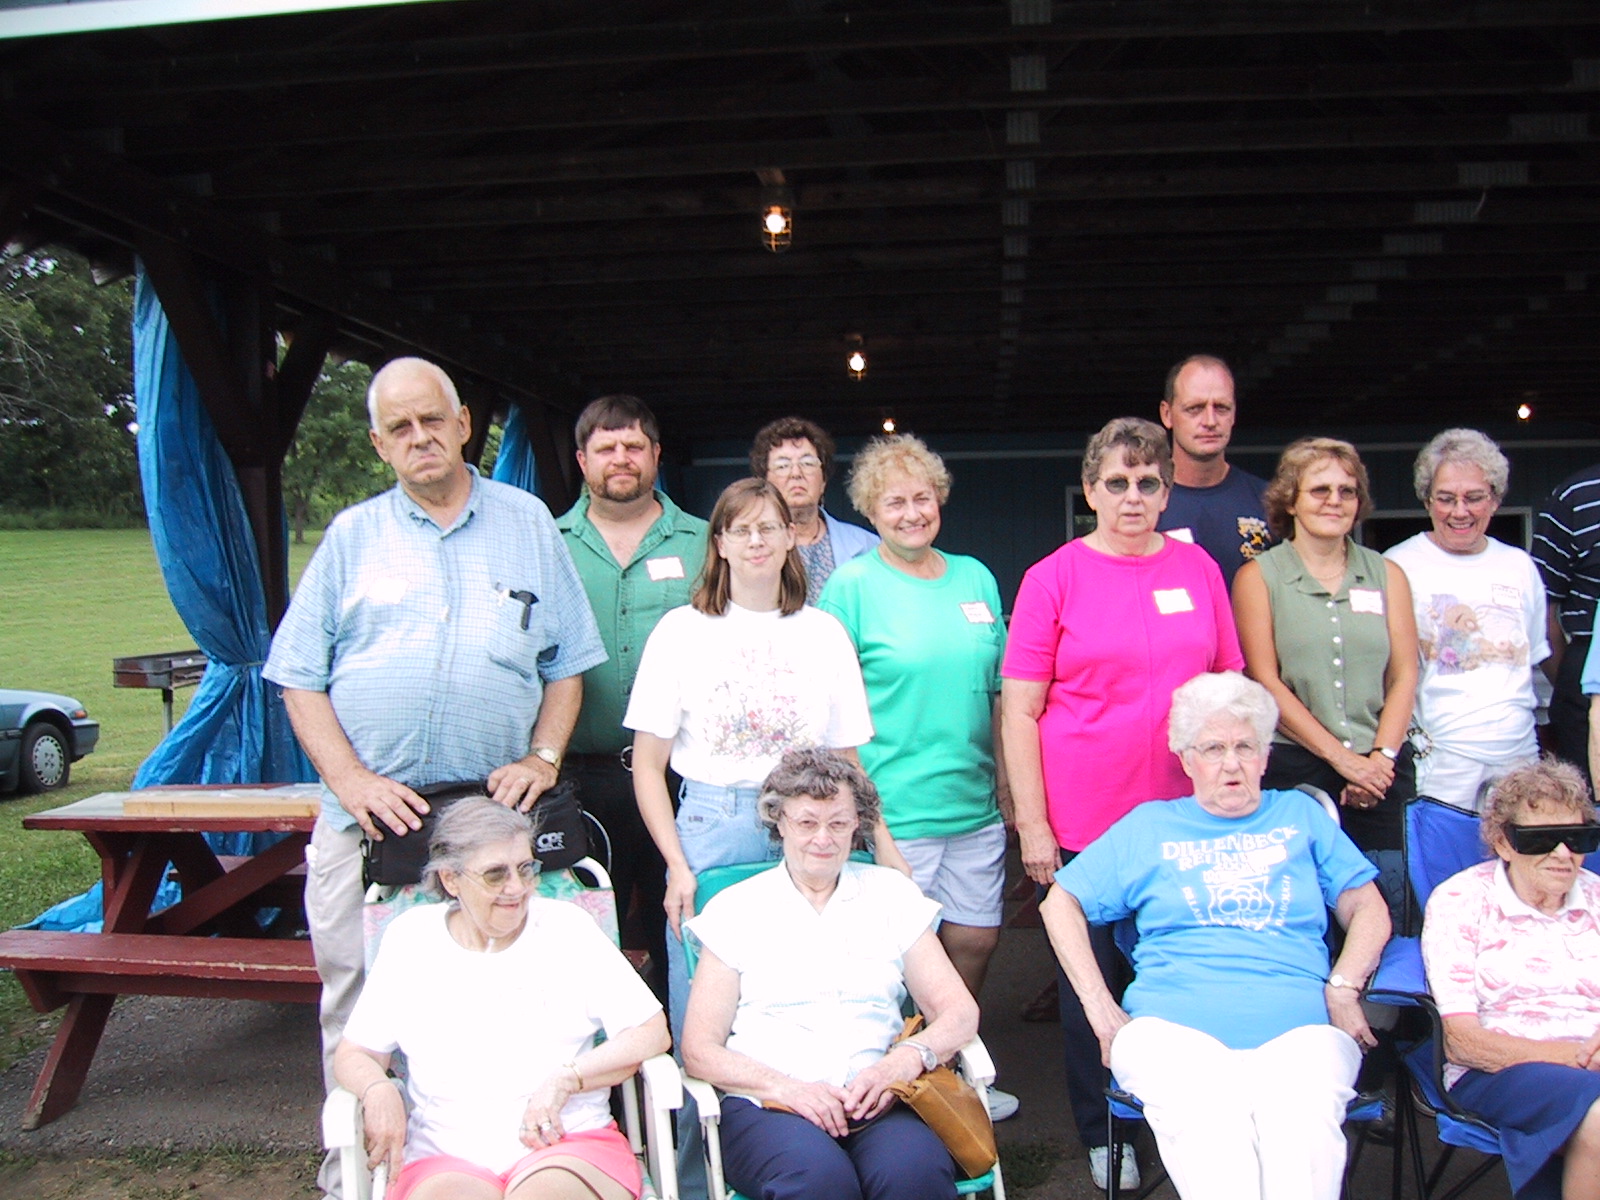 The 101st Dillenbeck Family Reunion